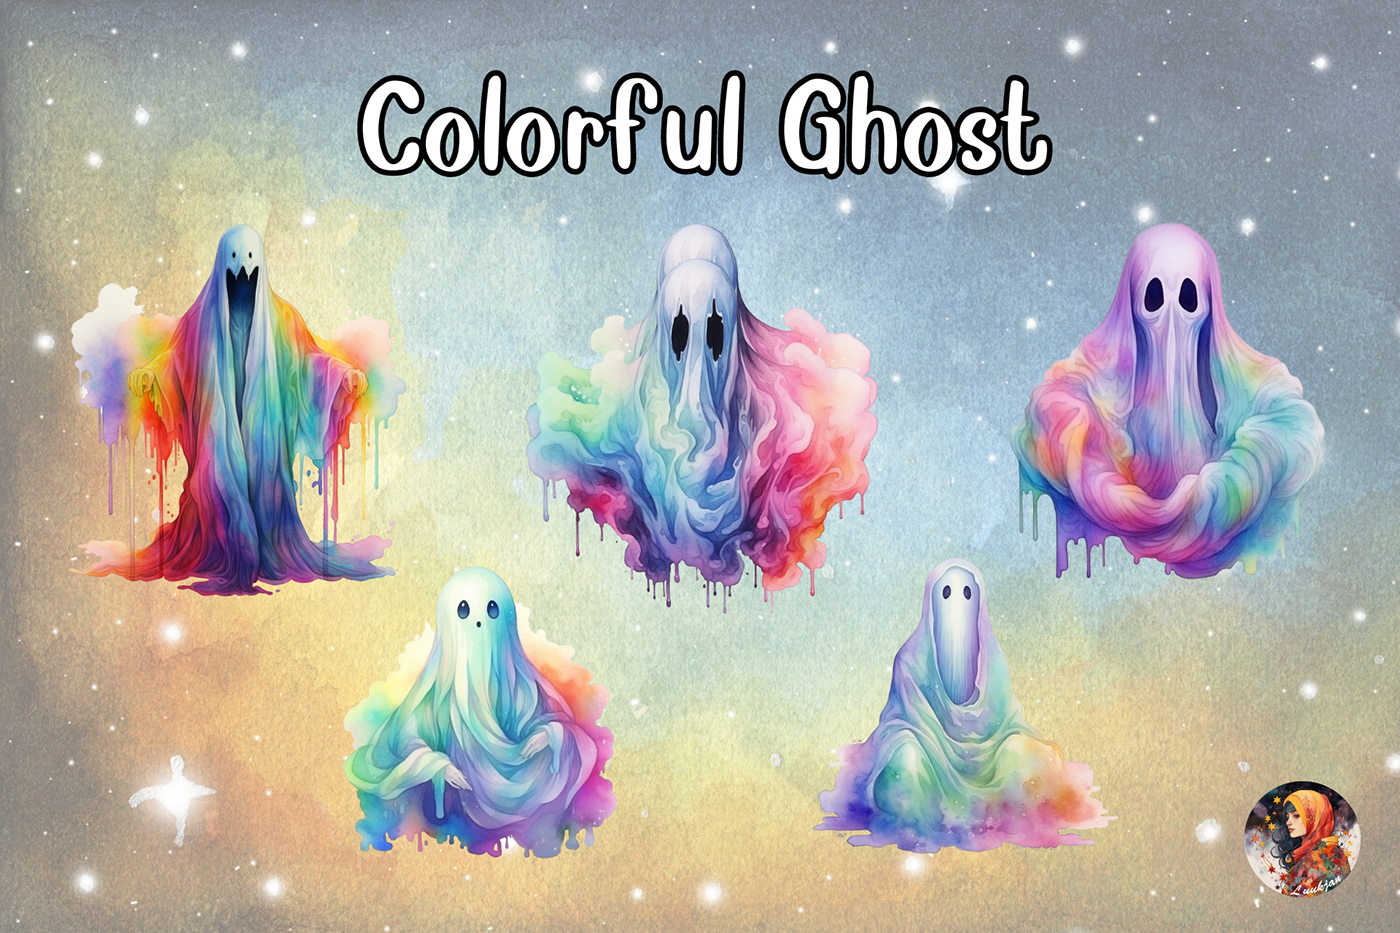 colorful ghost vibrant spooky Supernatural spectral apparition Halloween eerie phantasm